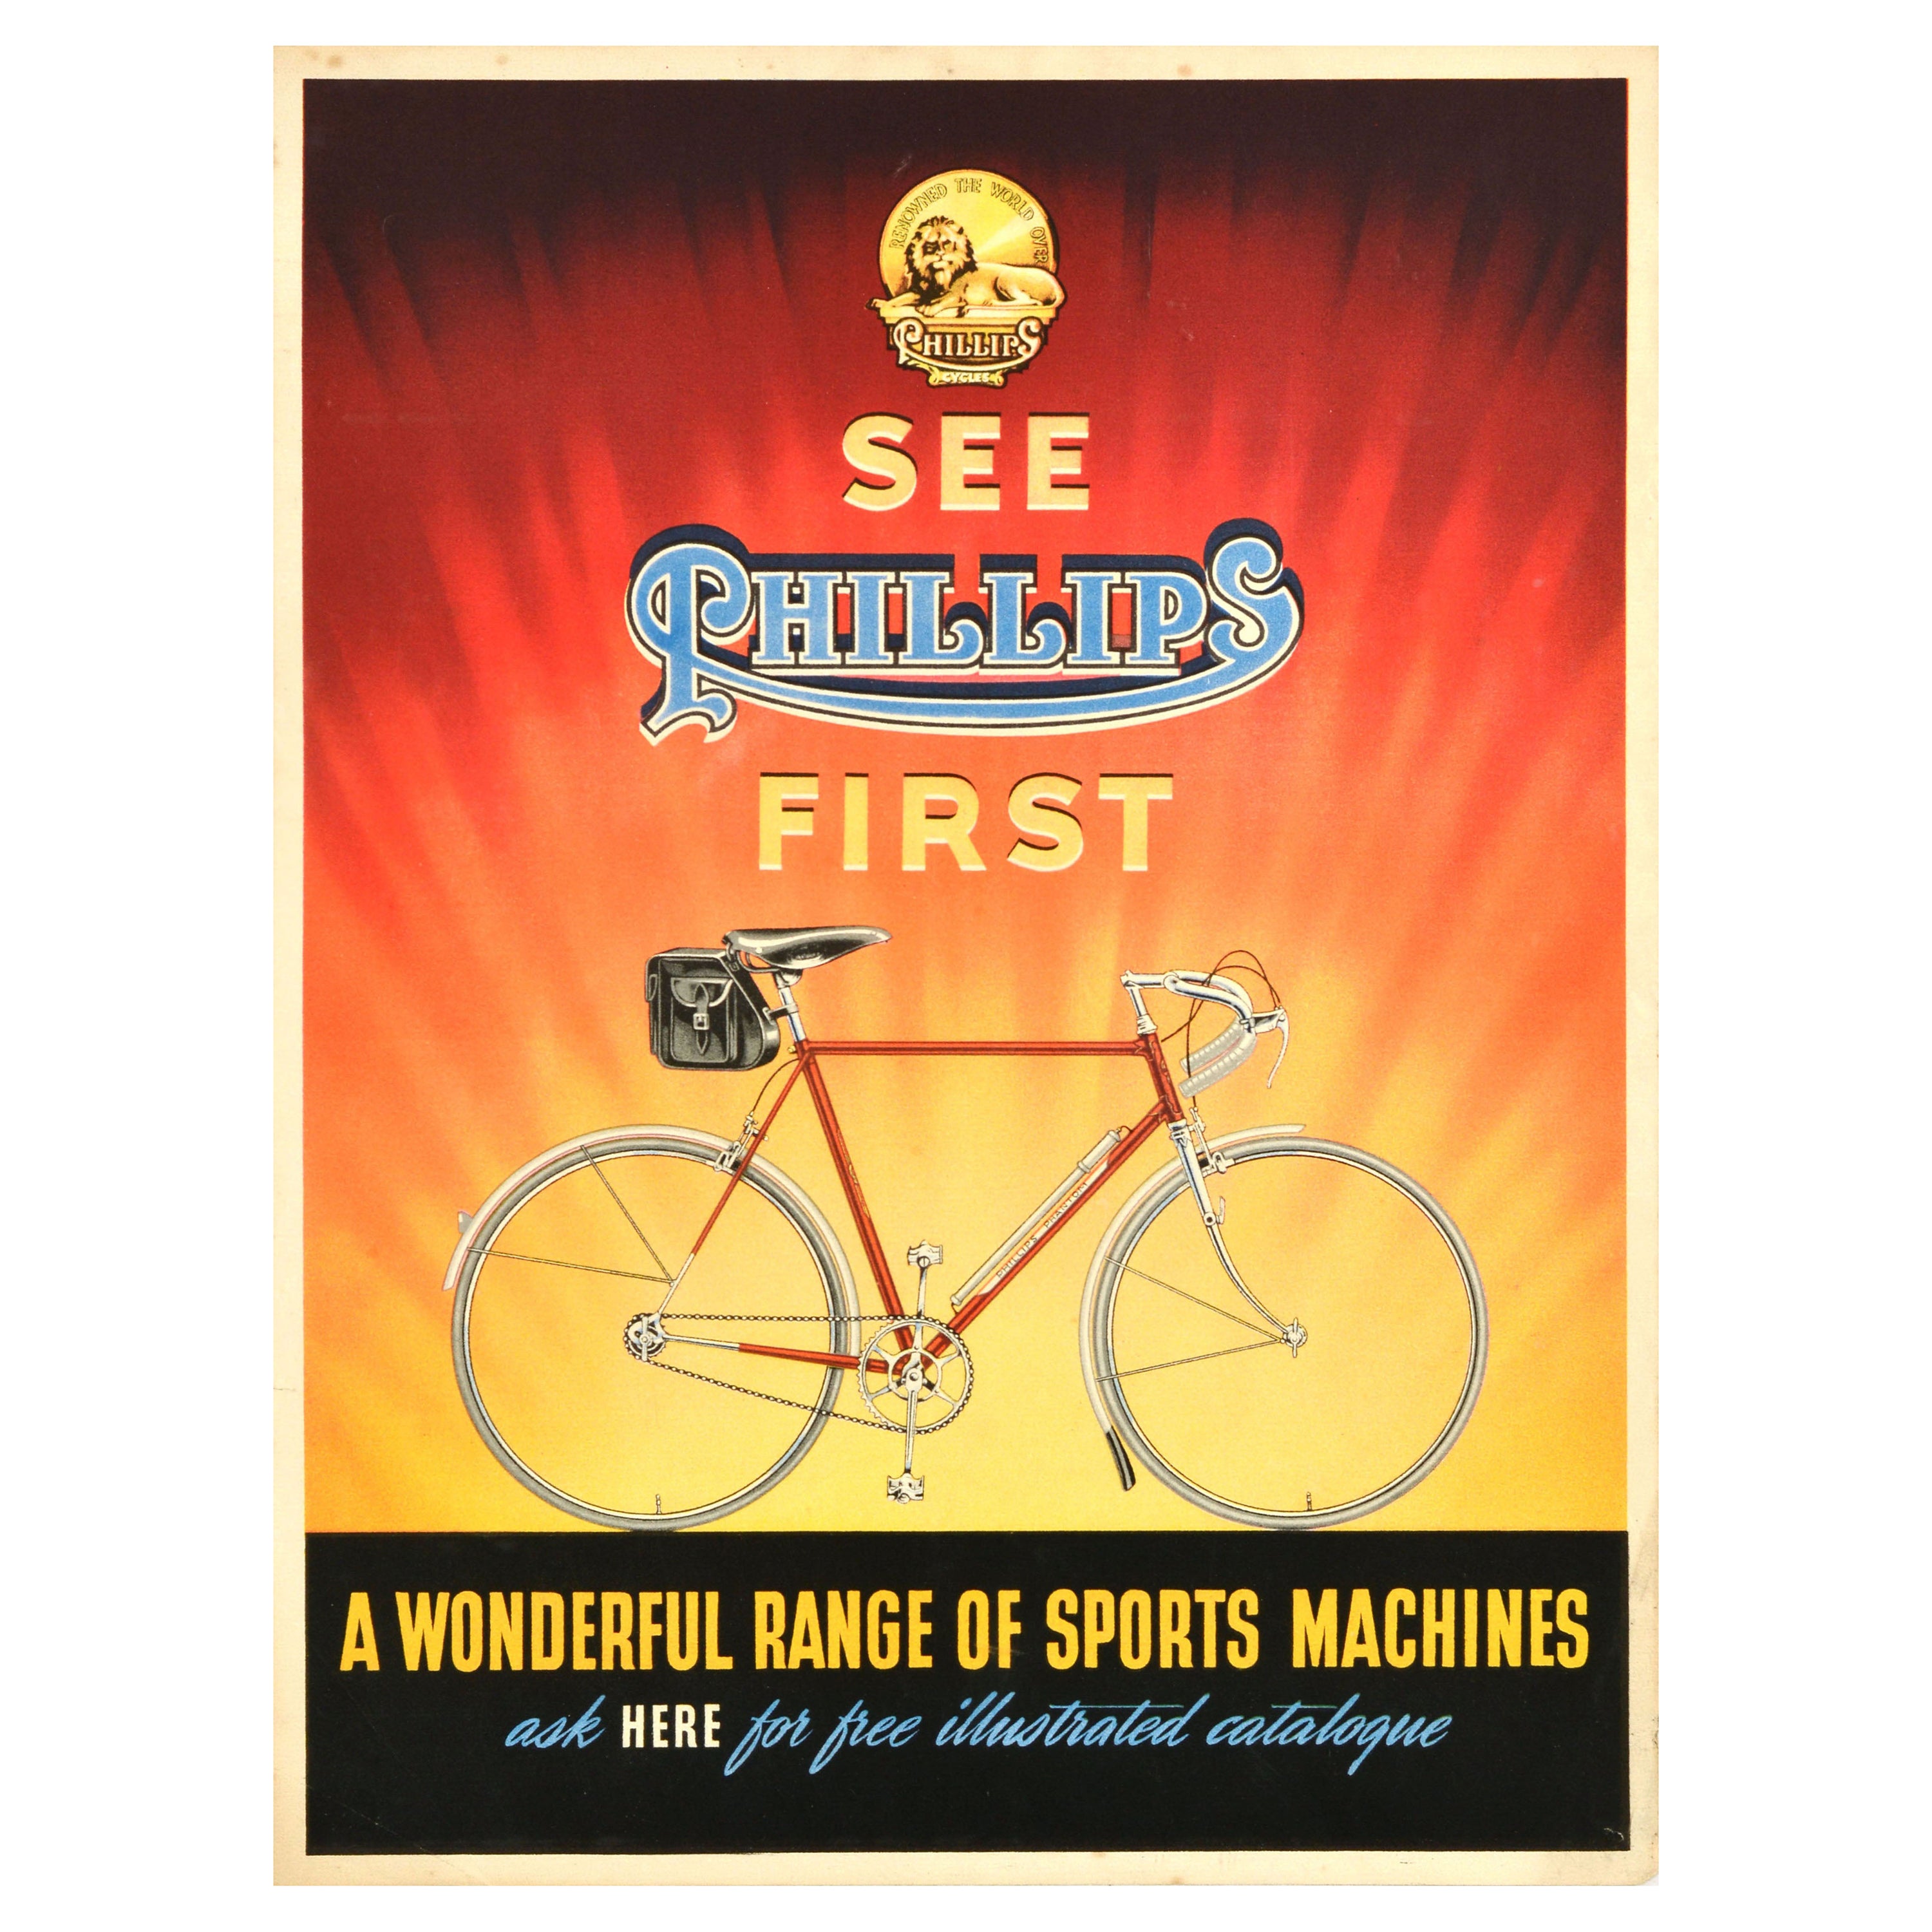 Original Vintage Bicycle Advertising Poster See Phillips First Sports Machines